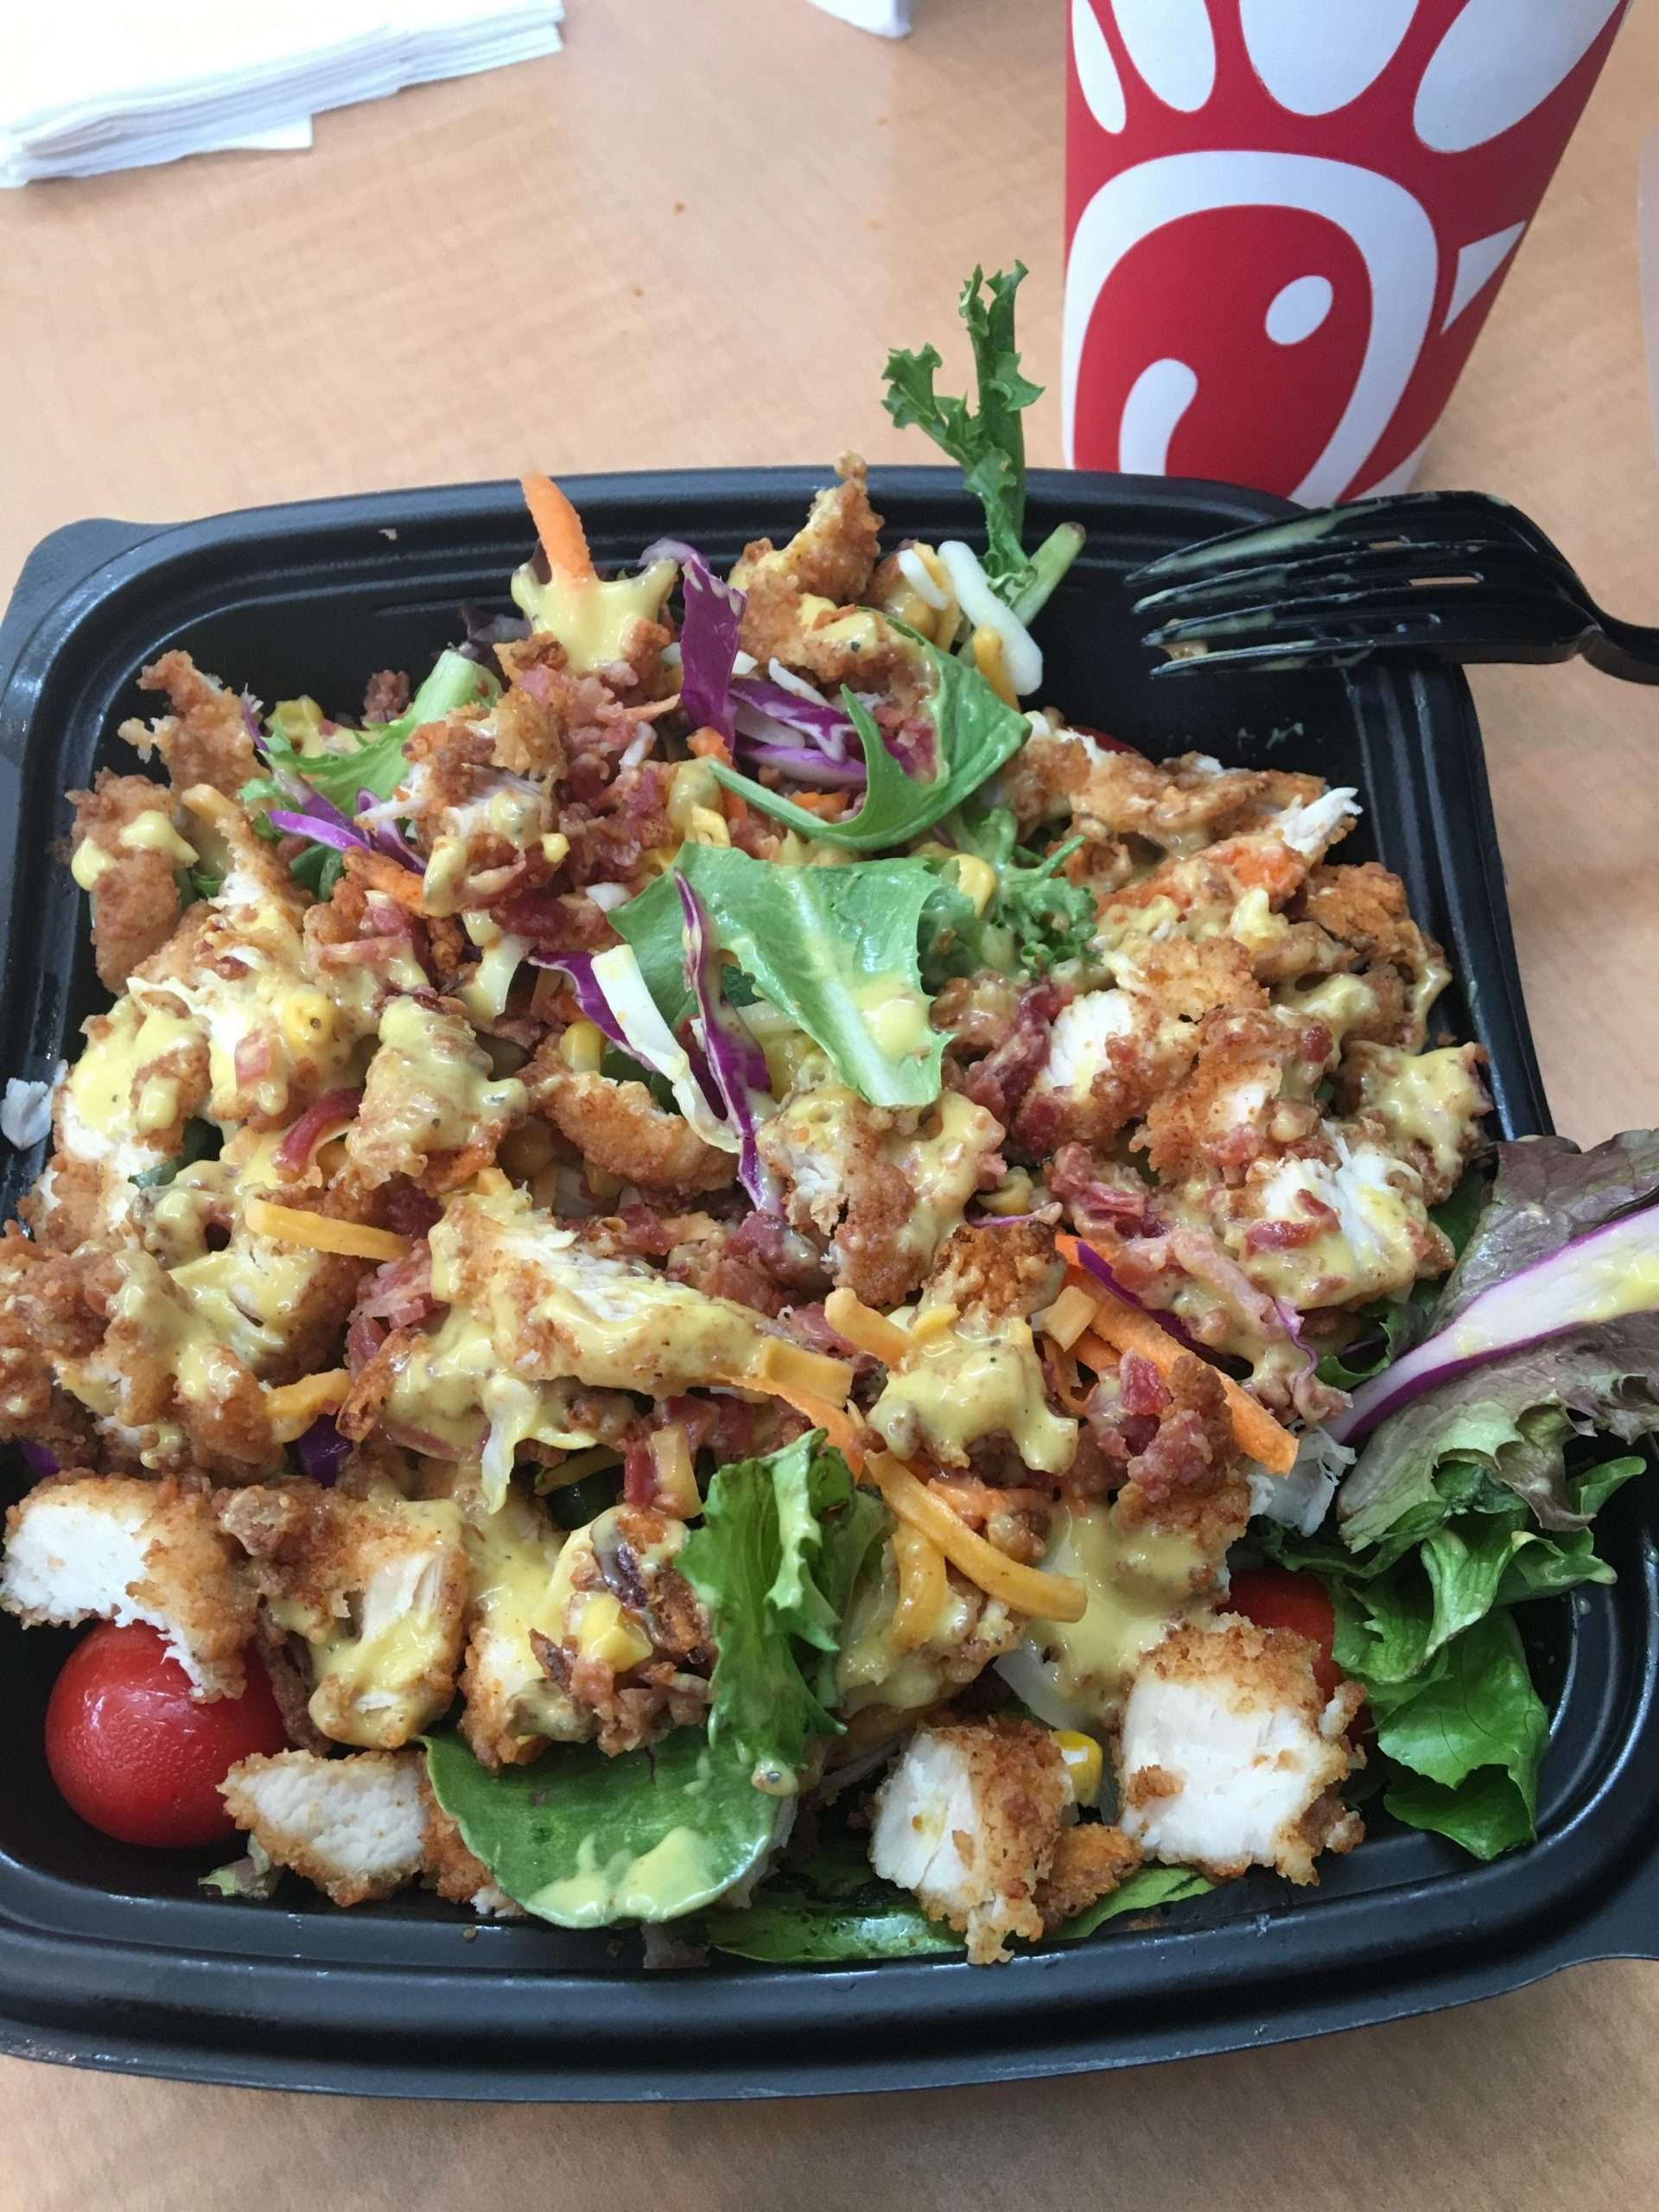 how many calories in chick fil a chicken salad mishkanet com scaled